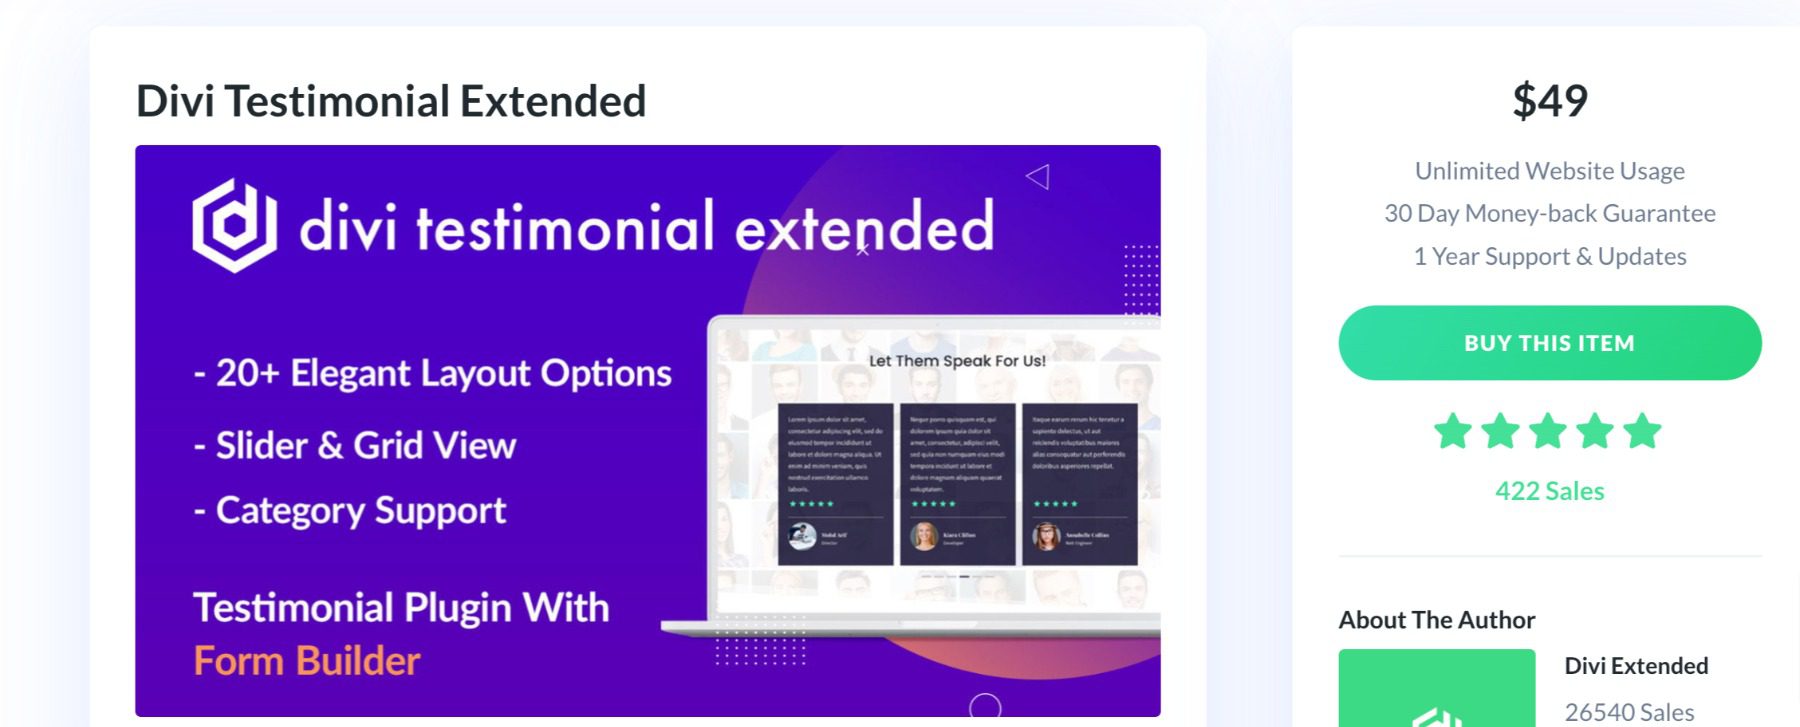 The Divi Testimonial Extended extension.